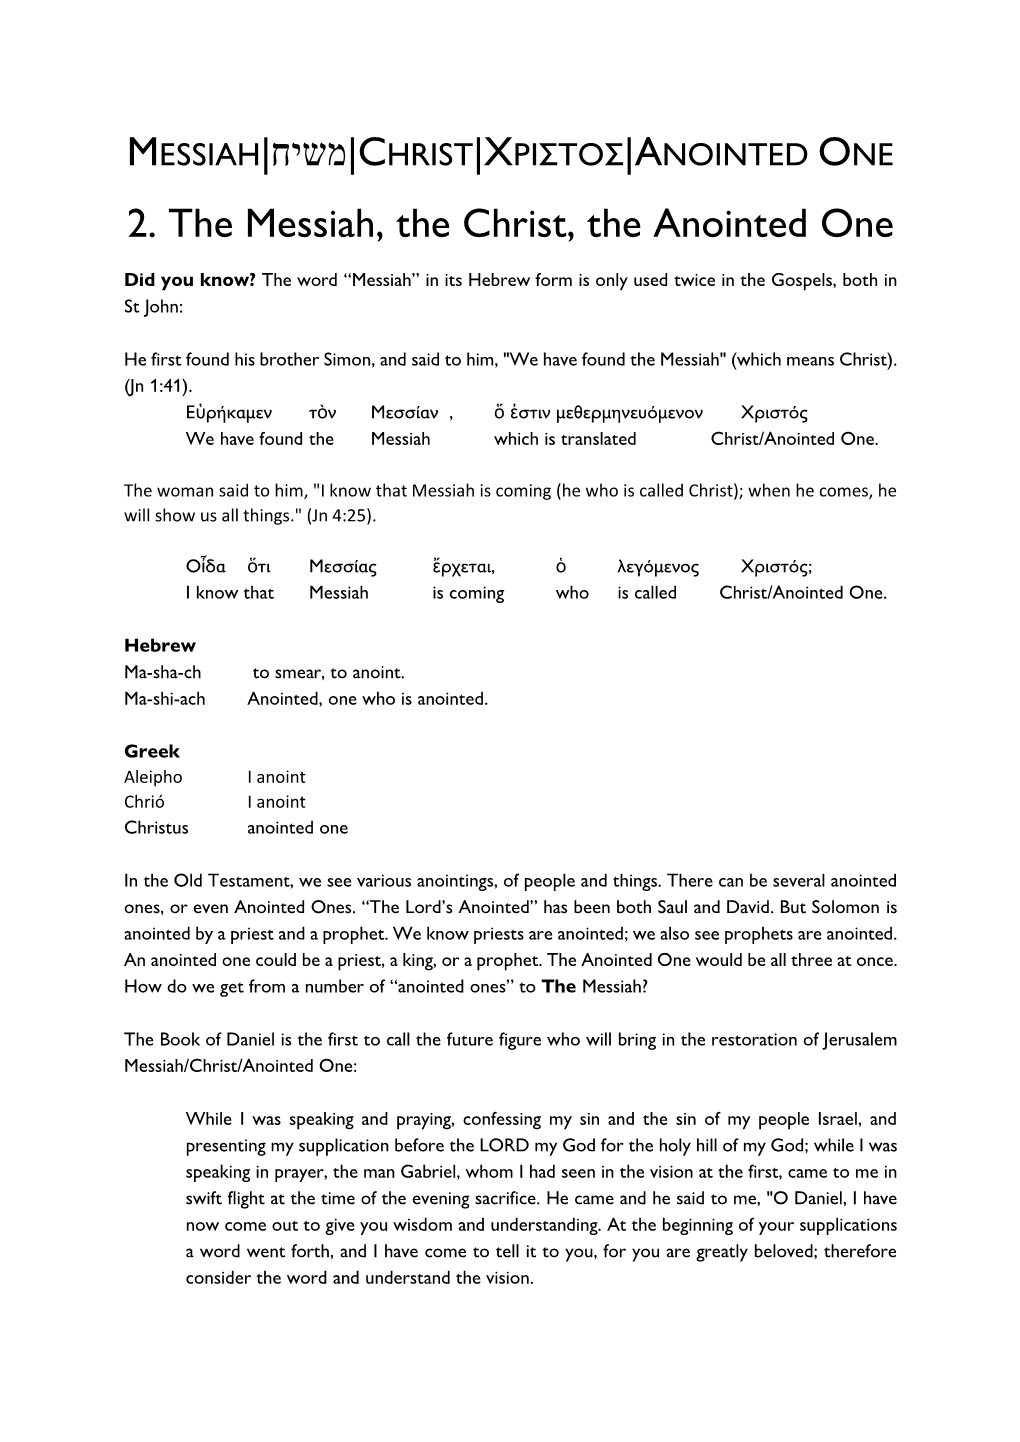 2. the Messiah, the Christ, the Anointed One